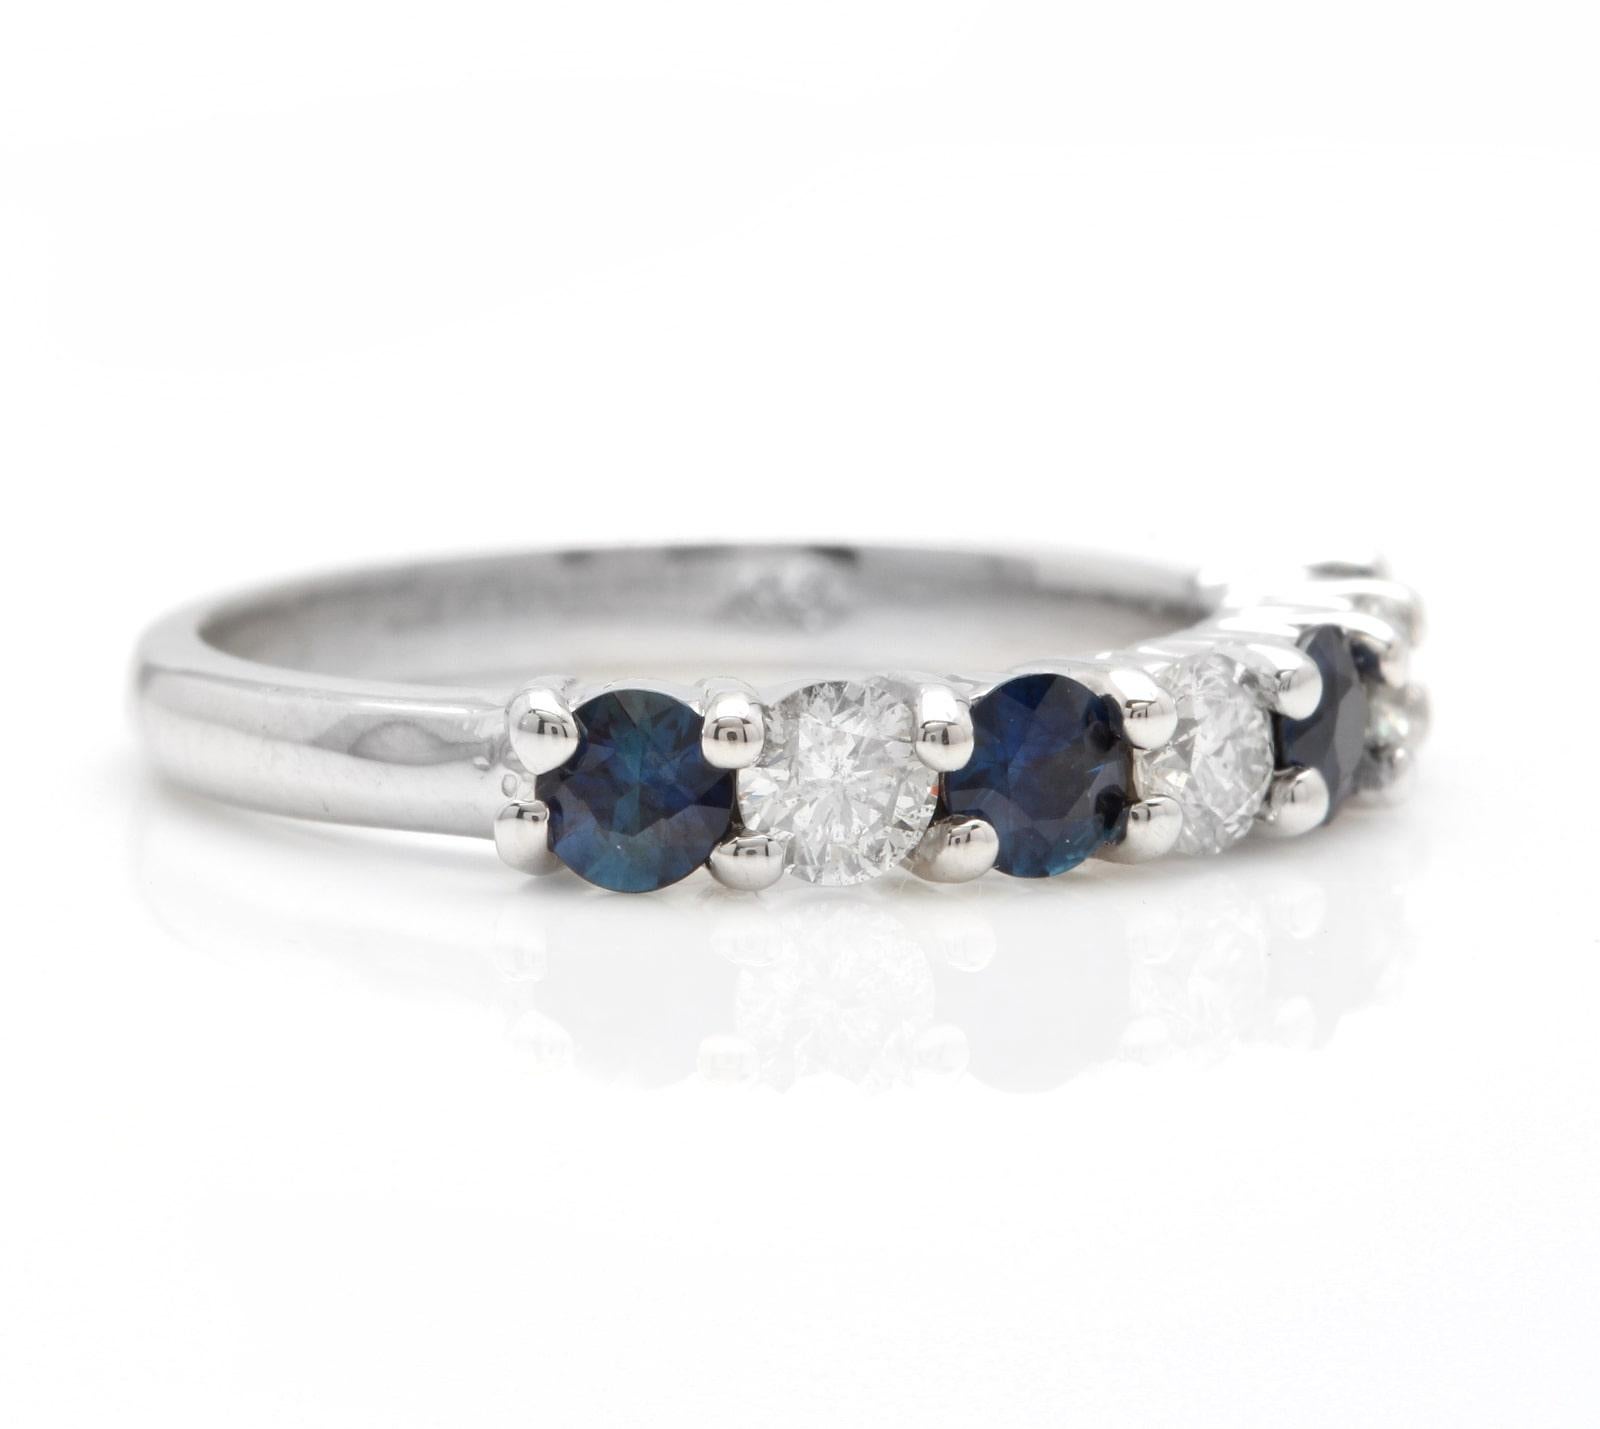 1.00 Carat Natural Sapphire and Diamond 14K Solid White Gold Ring

Suggested Replacement Value: Approx. $5,000.00

Total Natural Round Cut Sapphires Weight: Approx. 0.60 Carats 

Sapphire Treatment: Heat

Natural Round Diamonds Weight: Approx. 0.40